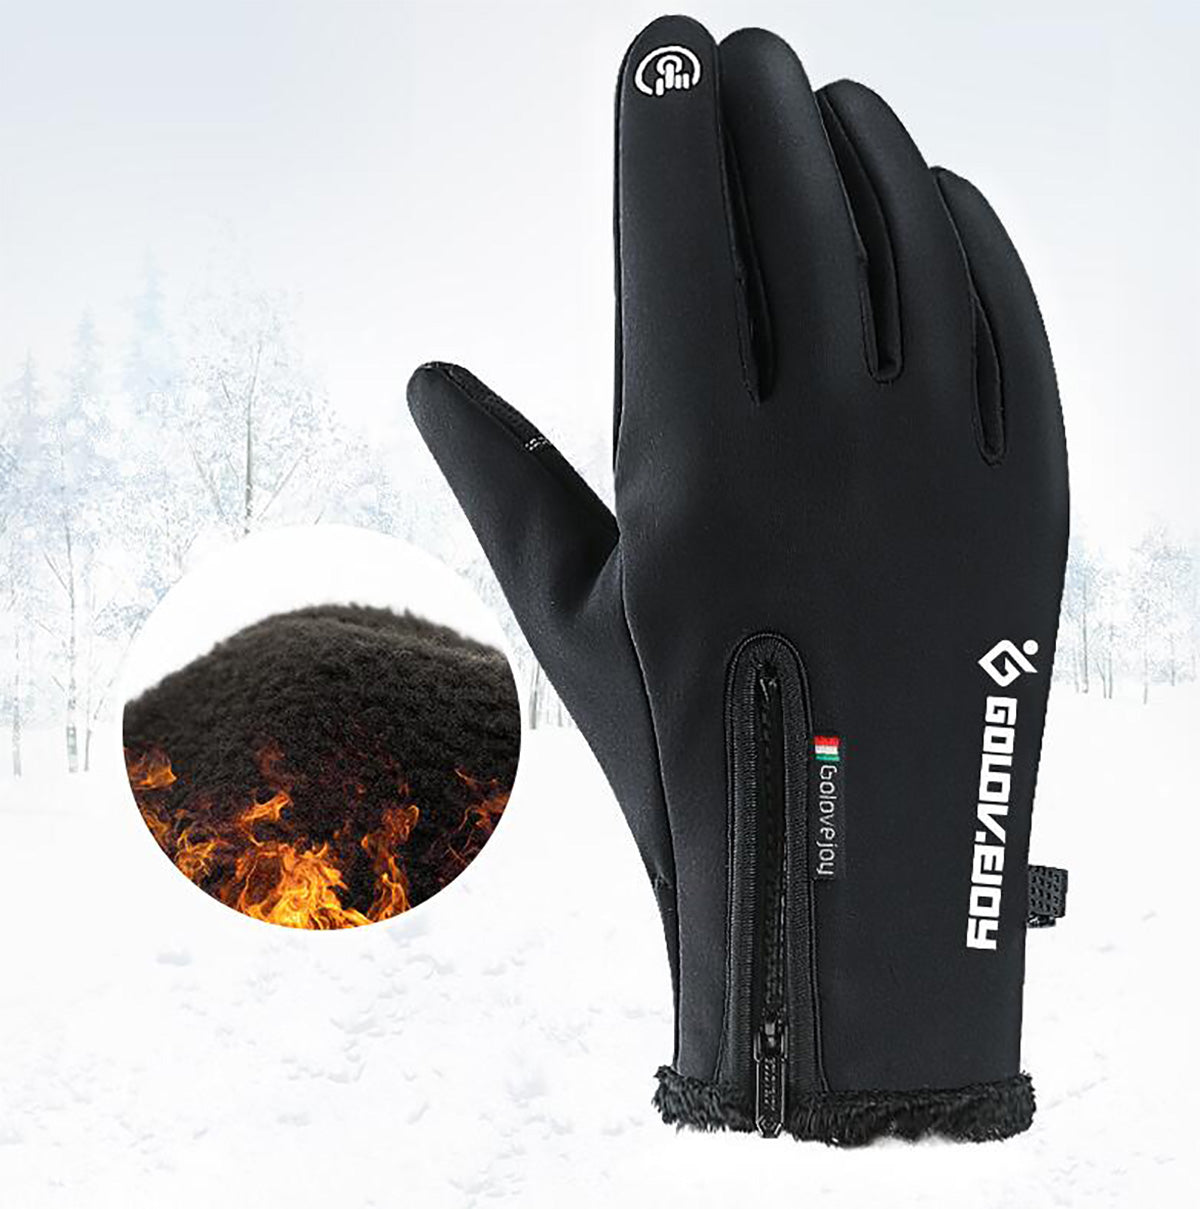 Black Touch Screen Gloves Zipper Thermal Winter Sports Skiing Warm Mittens PU Leather Black